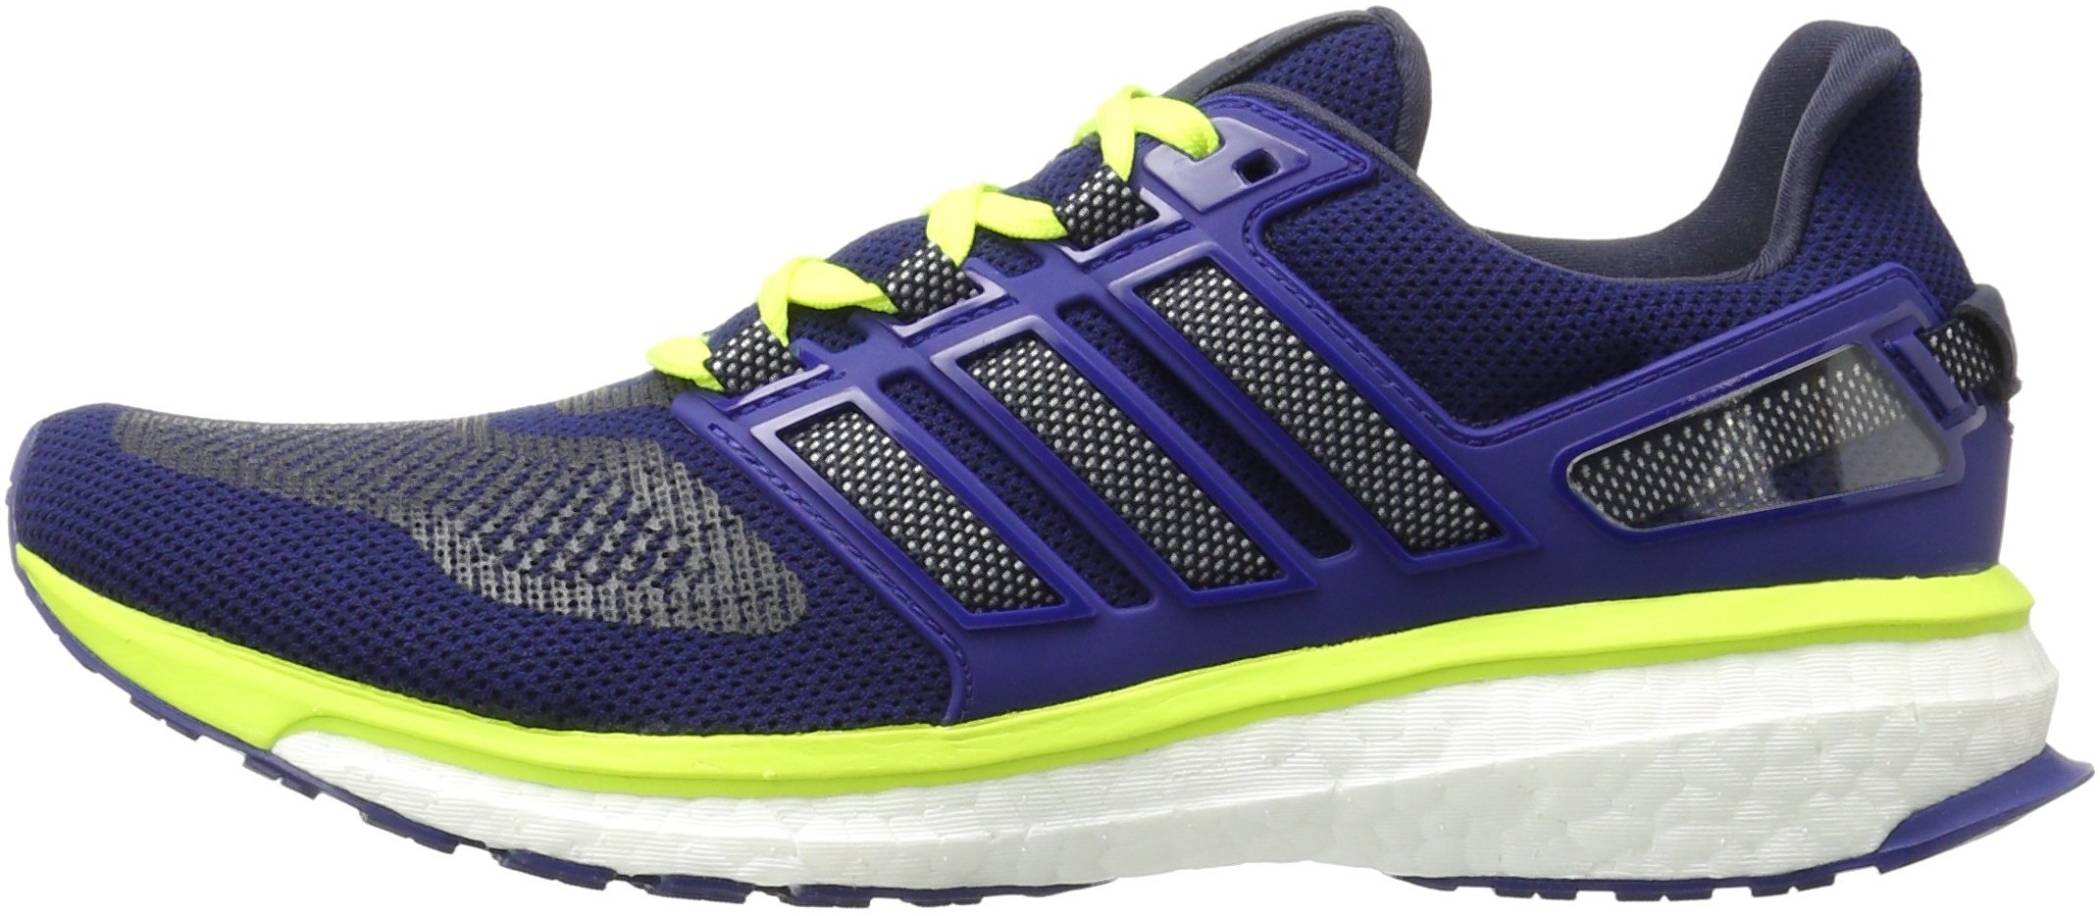 Adidas Energy Boost 3 Review 2022, Facts, Deals ($79) | RunRepeat صور مغذيه